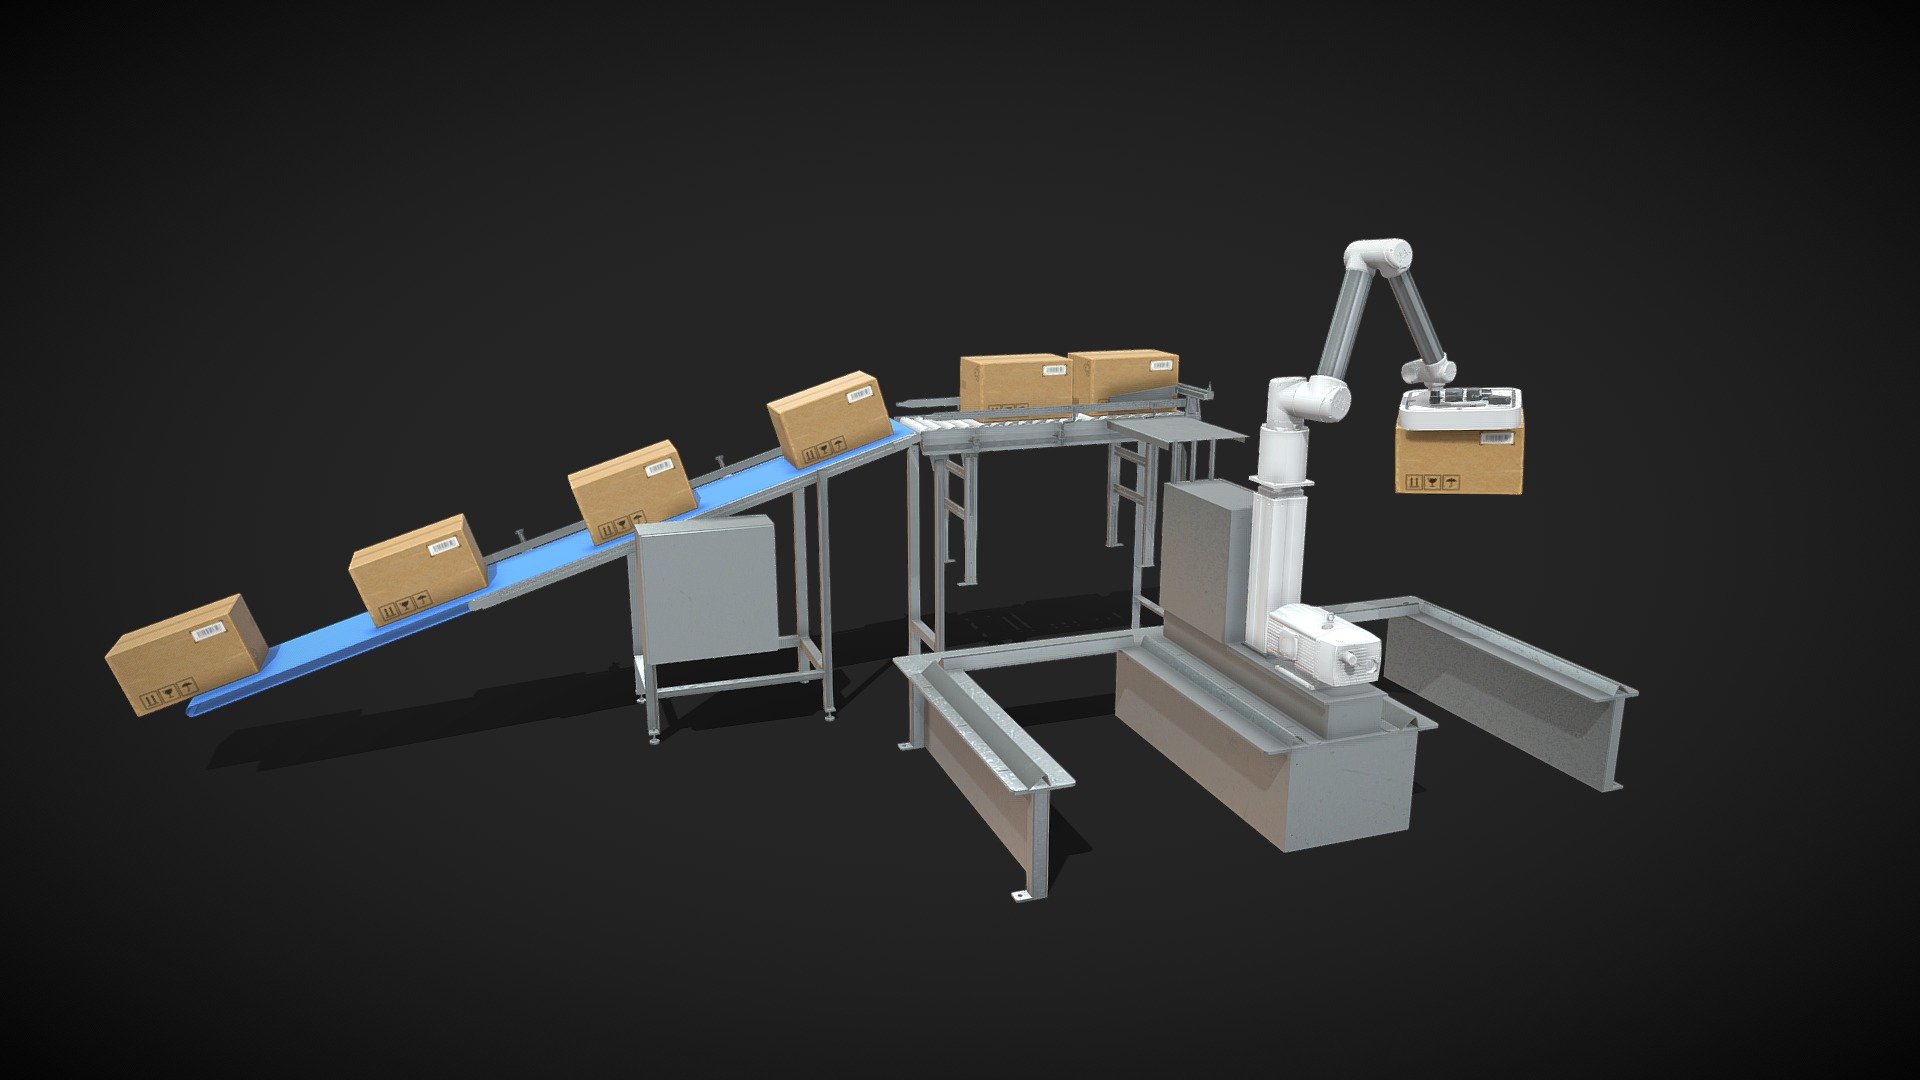 Robot Palletiser
Robot Palletiser system provides the flexibility to palletise a range of products efficiently and accurately while reducing labour and manual handling 3d model